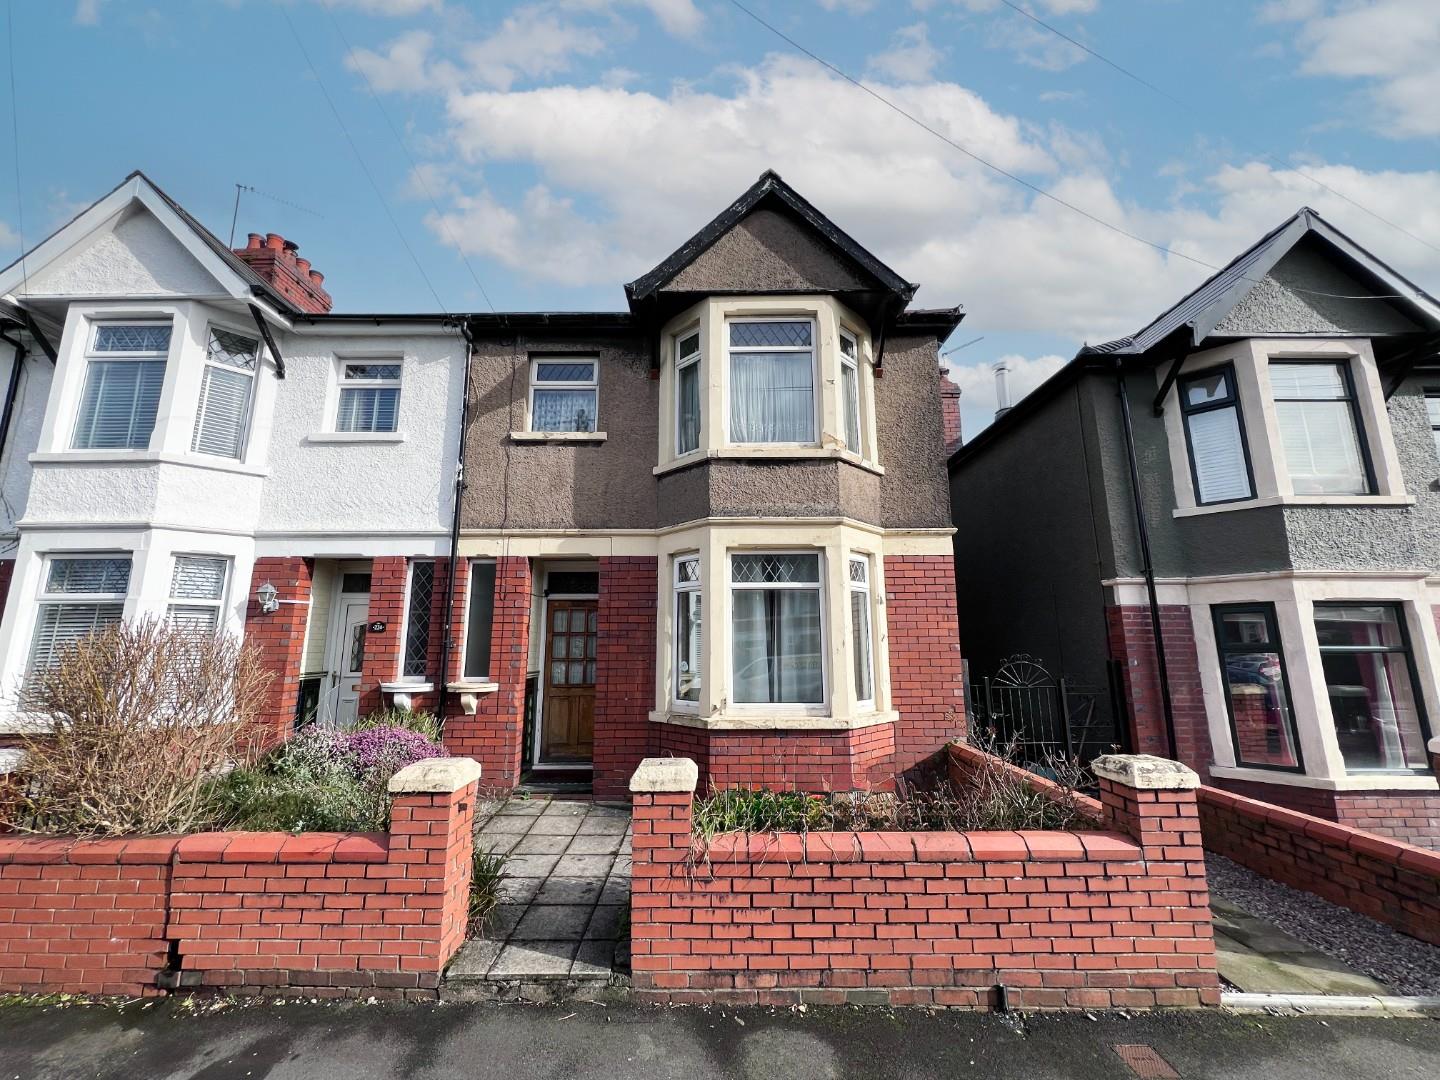 3 bed end of terrace house for sale in Caerphilly Road, Cardiff - Property Image 1